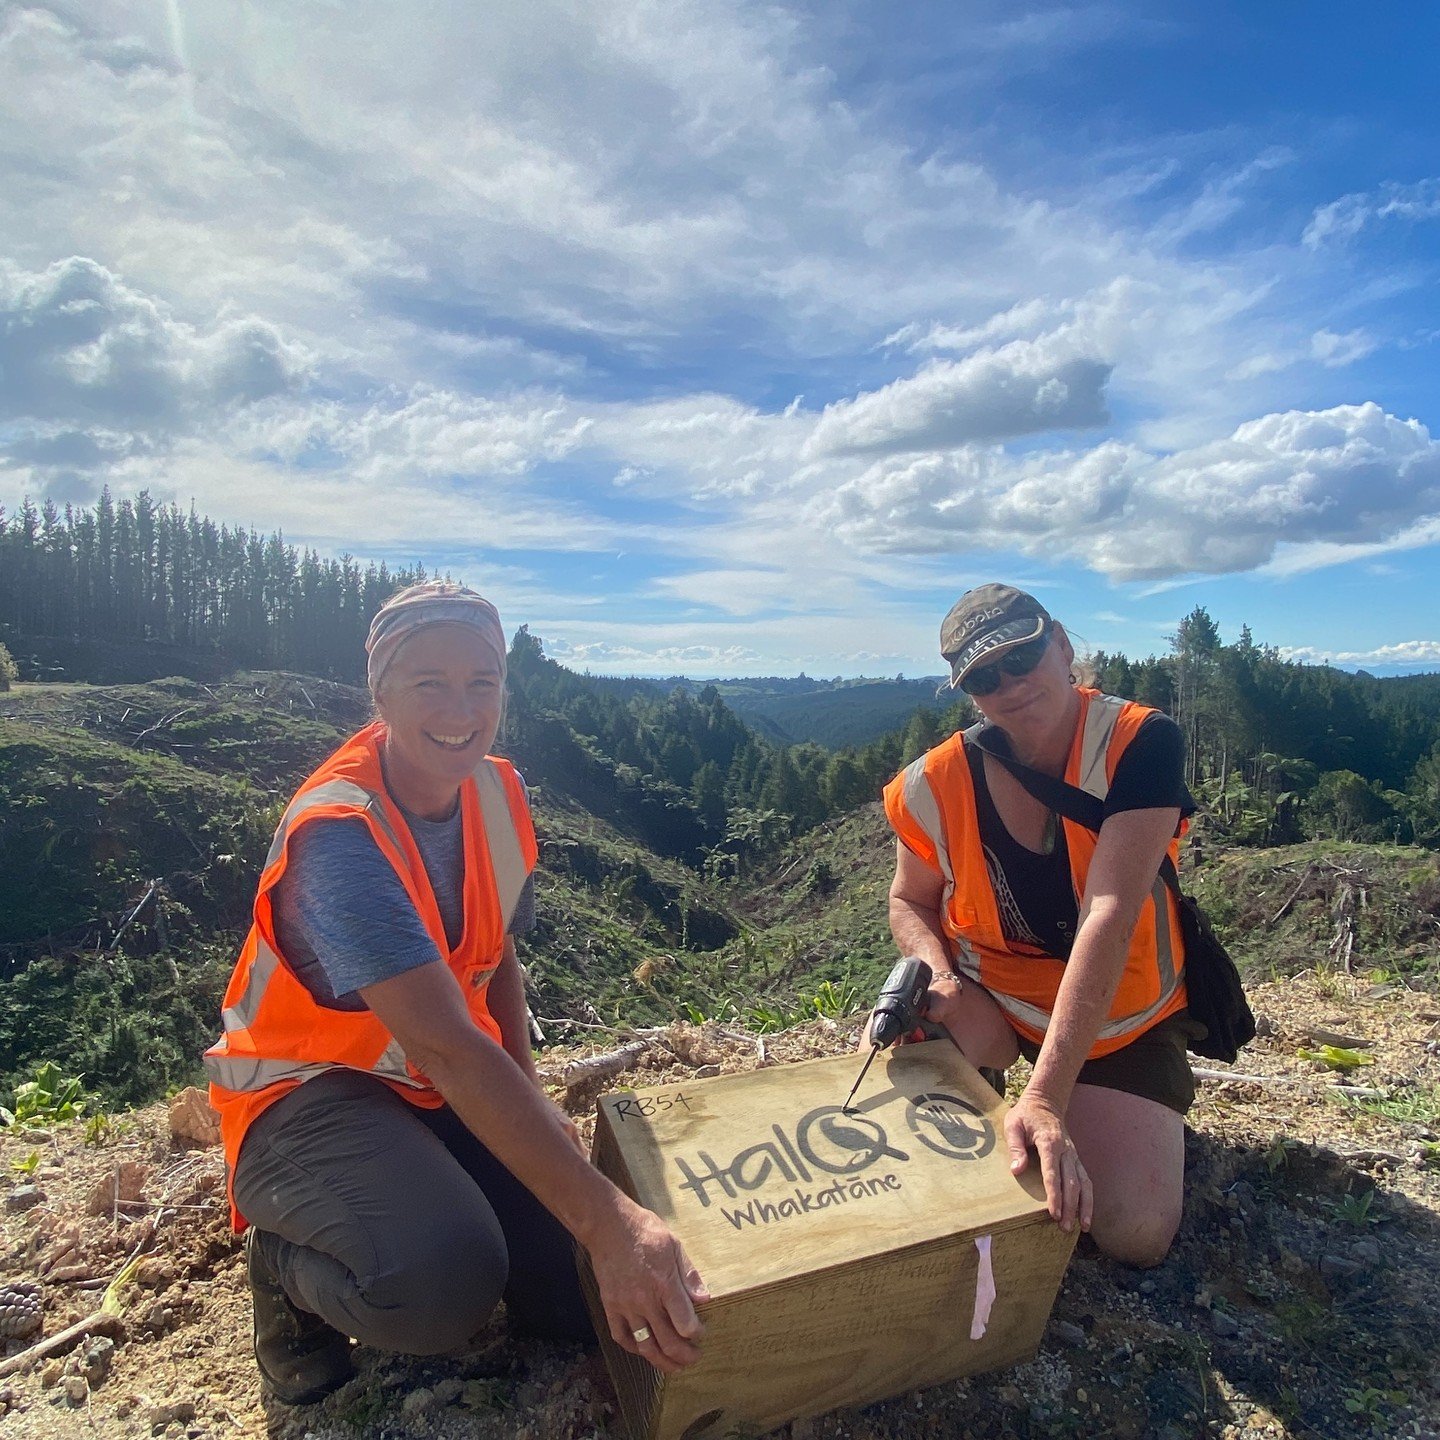 Last week, we deployed 80 DOC250 traps along Razorback Ridge ⛰️

🐀 These particular traps target ferrets, stoats, rats and hedgehogs. The aim is to create a safer habitat for our native species, in particular our tāōnga, the Kiwi (their presence evi